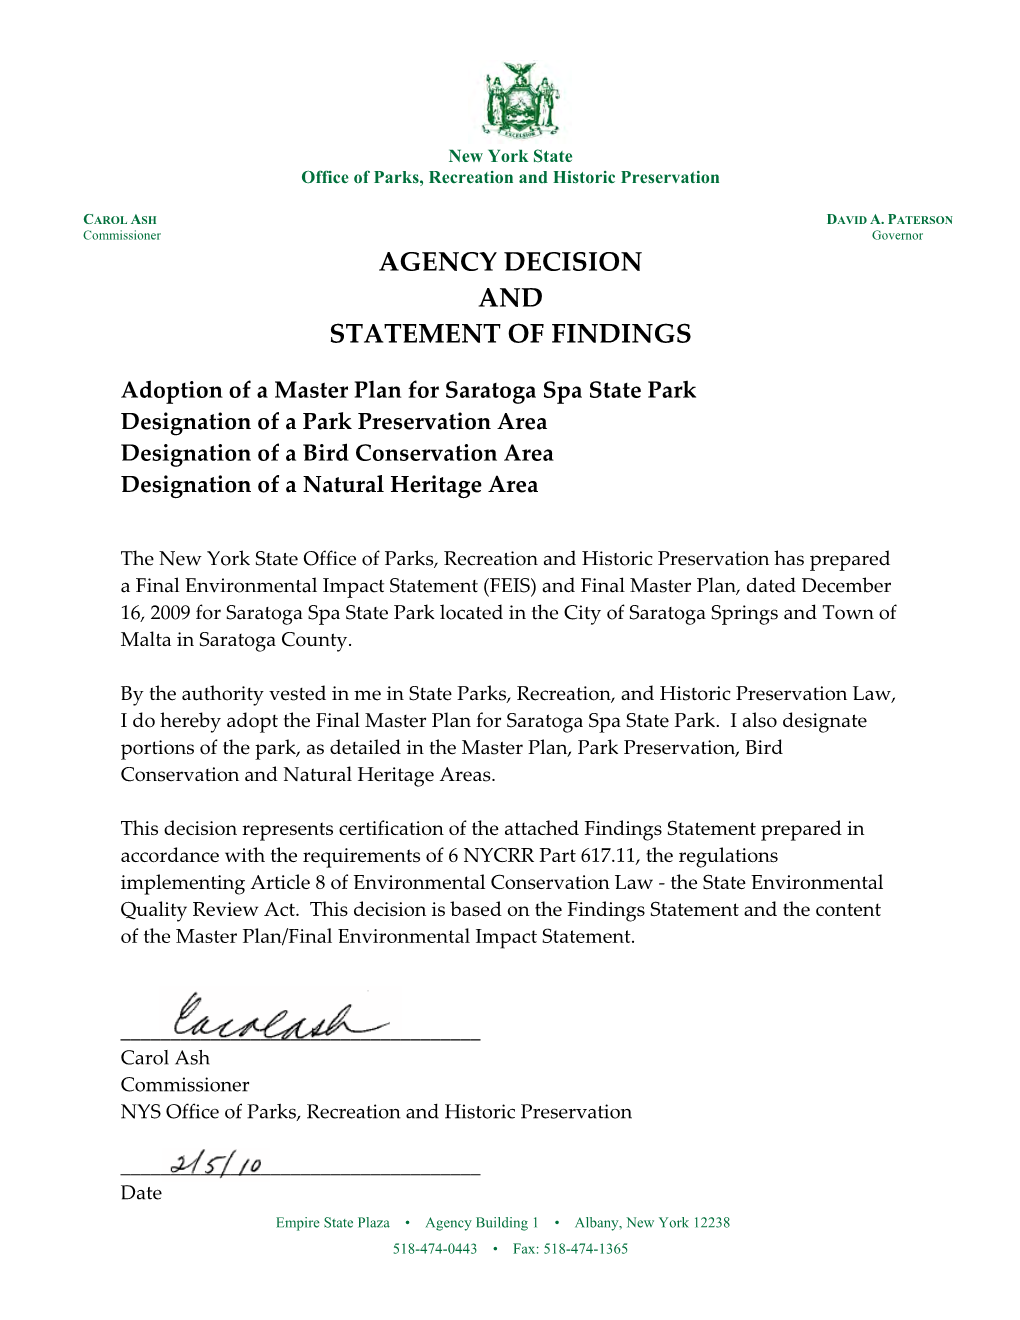 Signed Adoption & Findings Statement